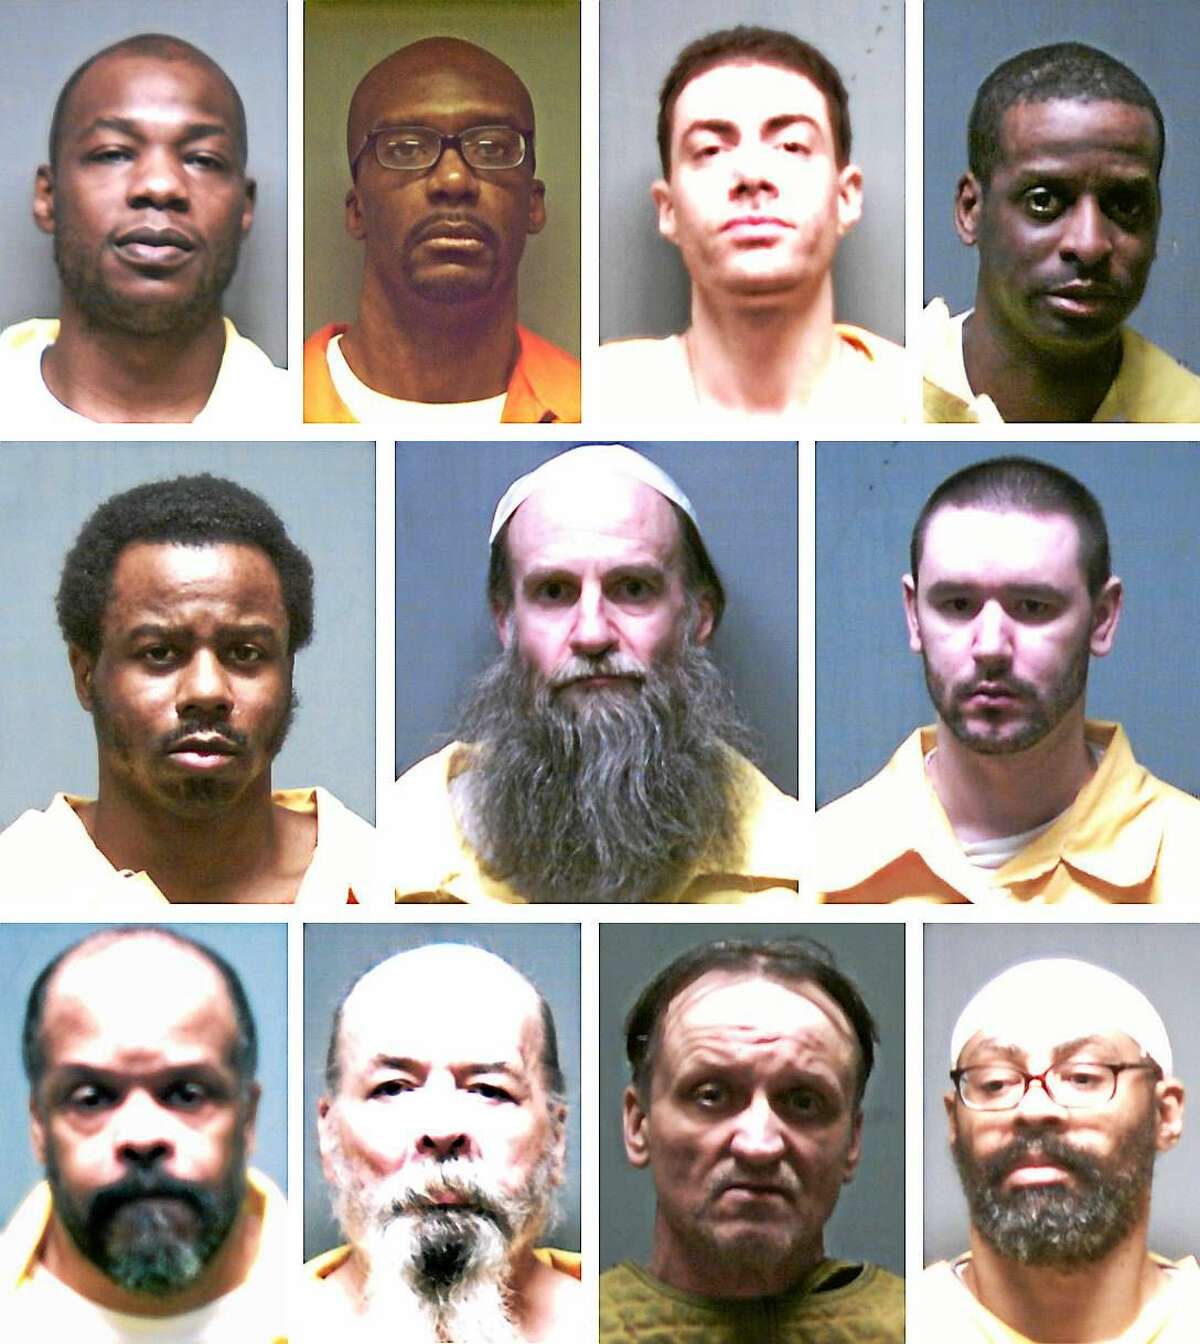 The 11 inmates on death row in Connecticut. Photos provided by the Connecticut Department of Correction.